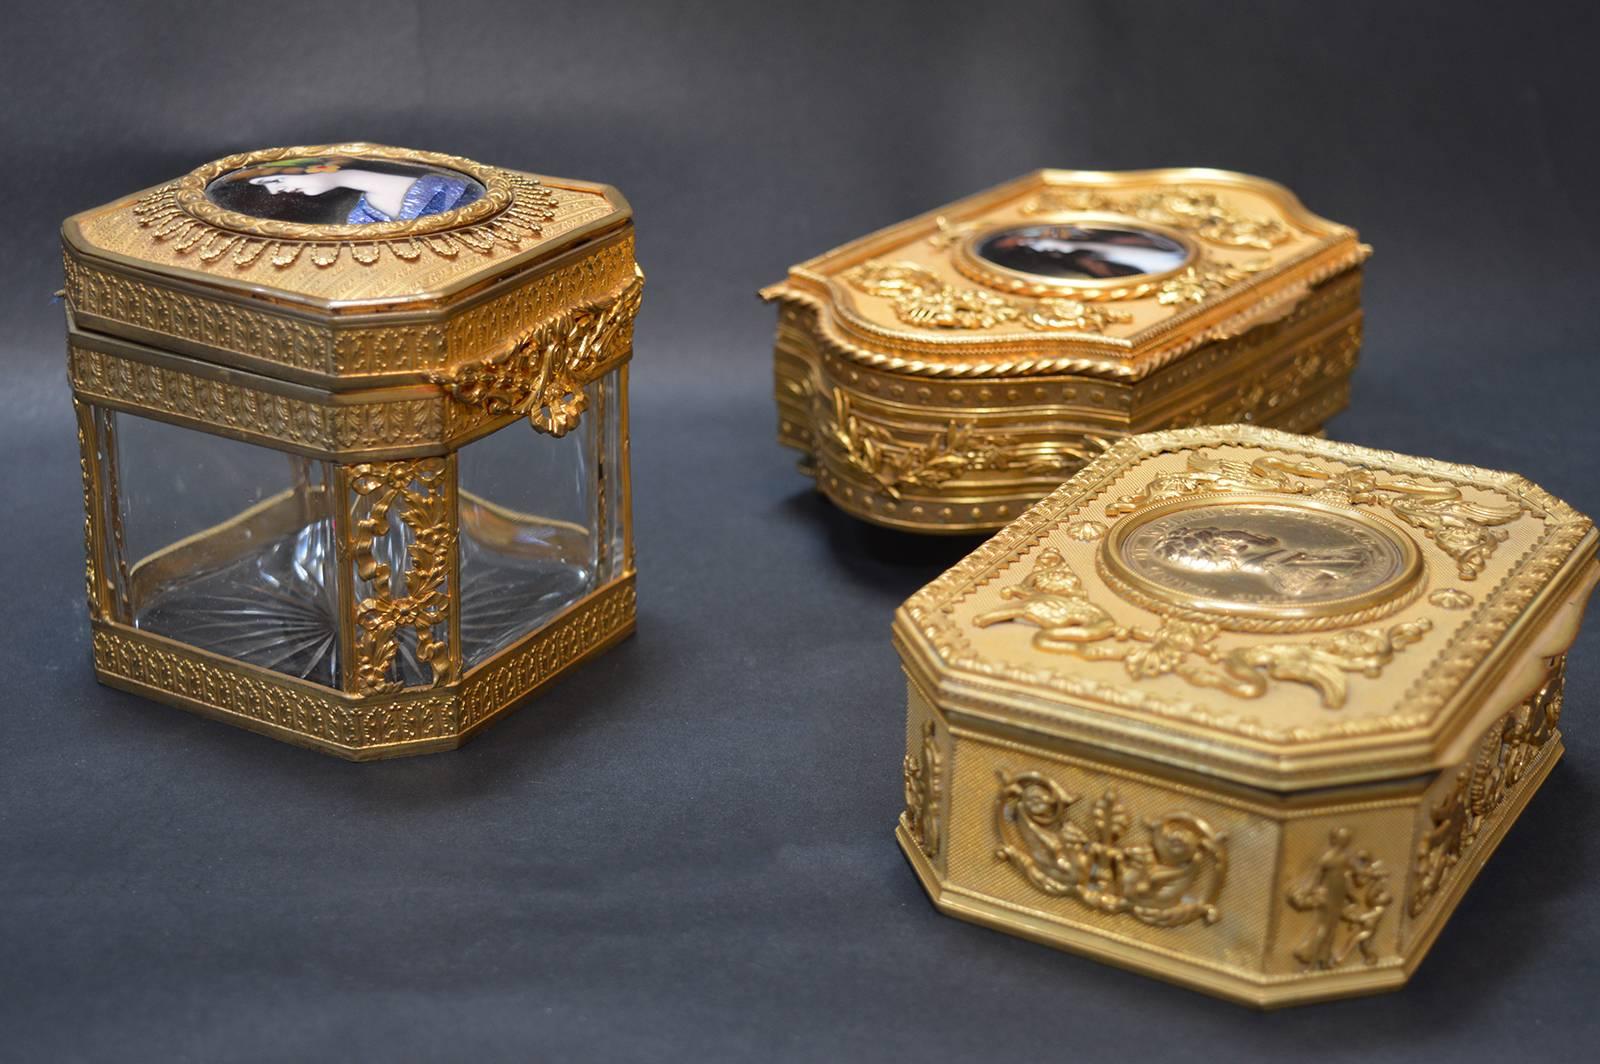 Three 19th century boxes. Hand-painted
Square glass box is 3.5